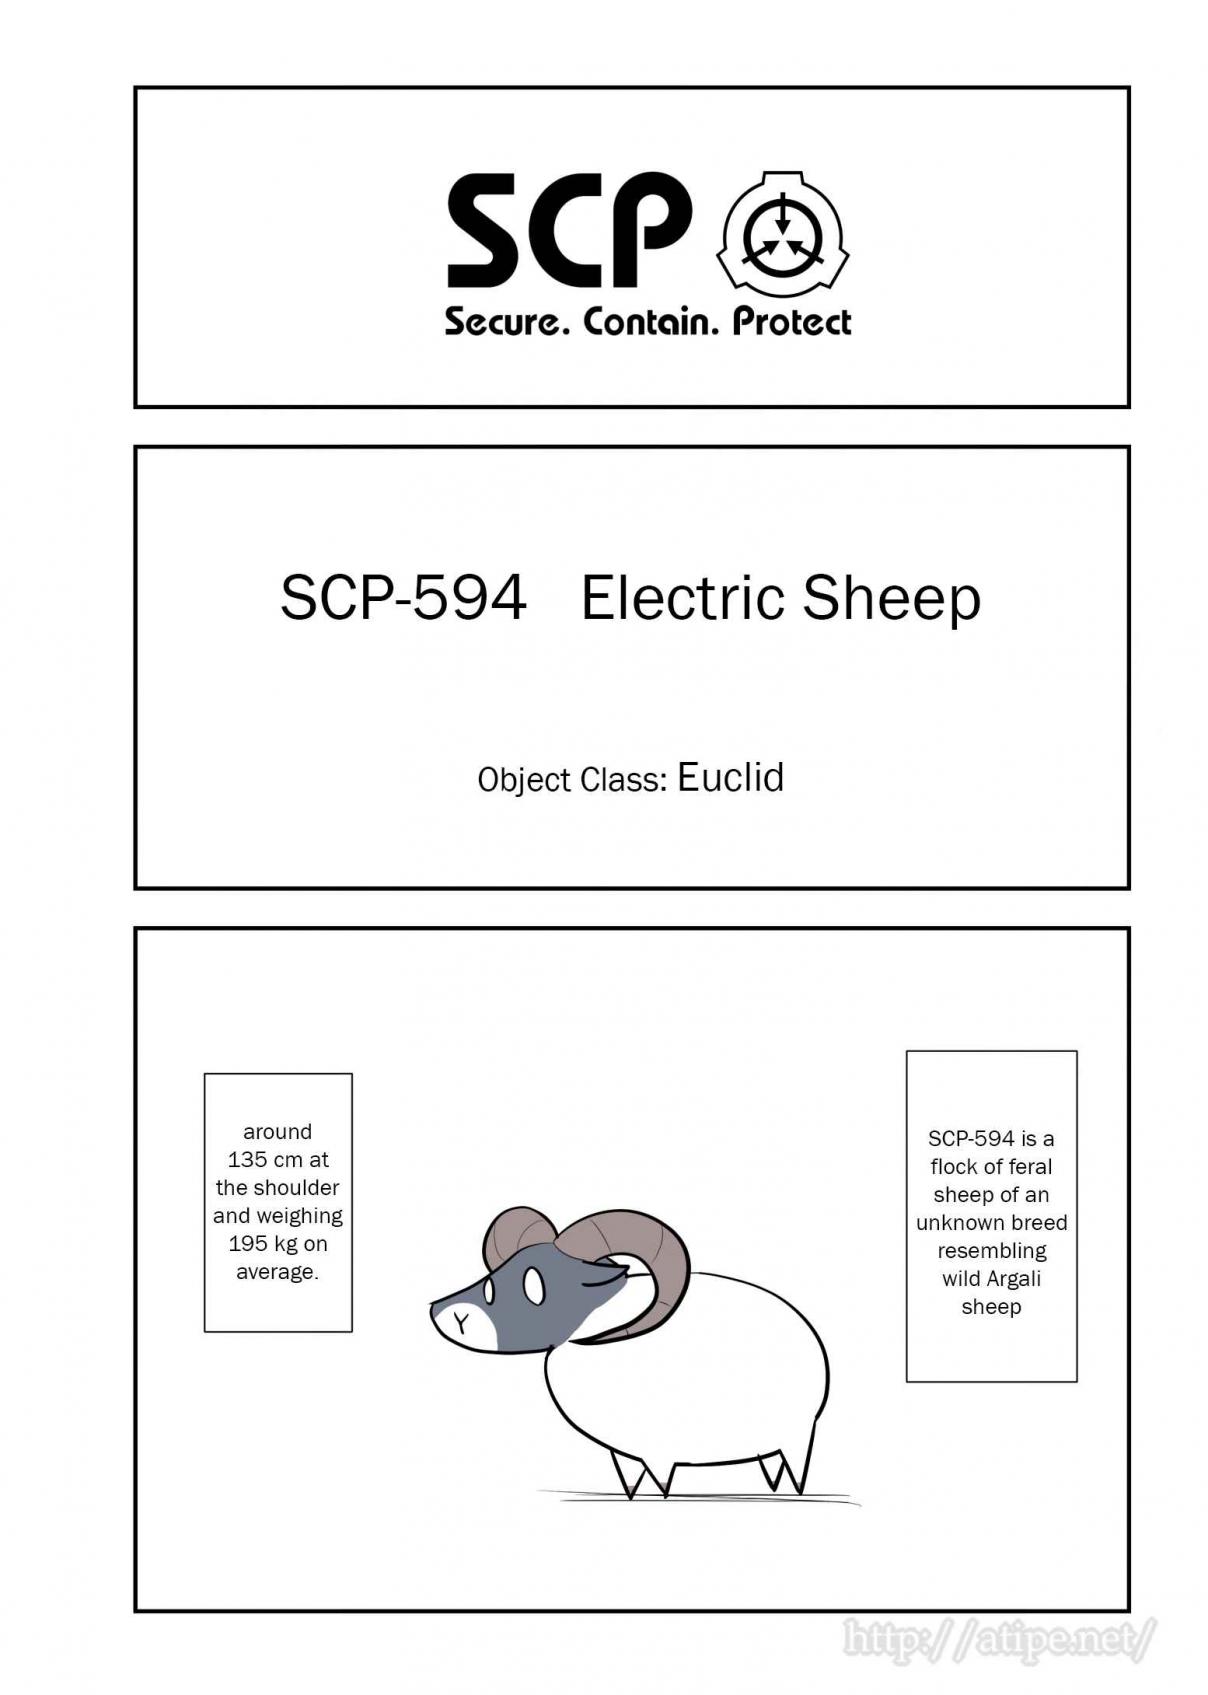 Oversimplified SCP Ch. 72 SCP 594